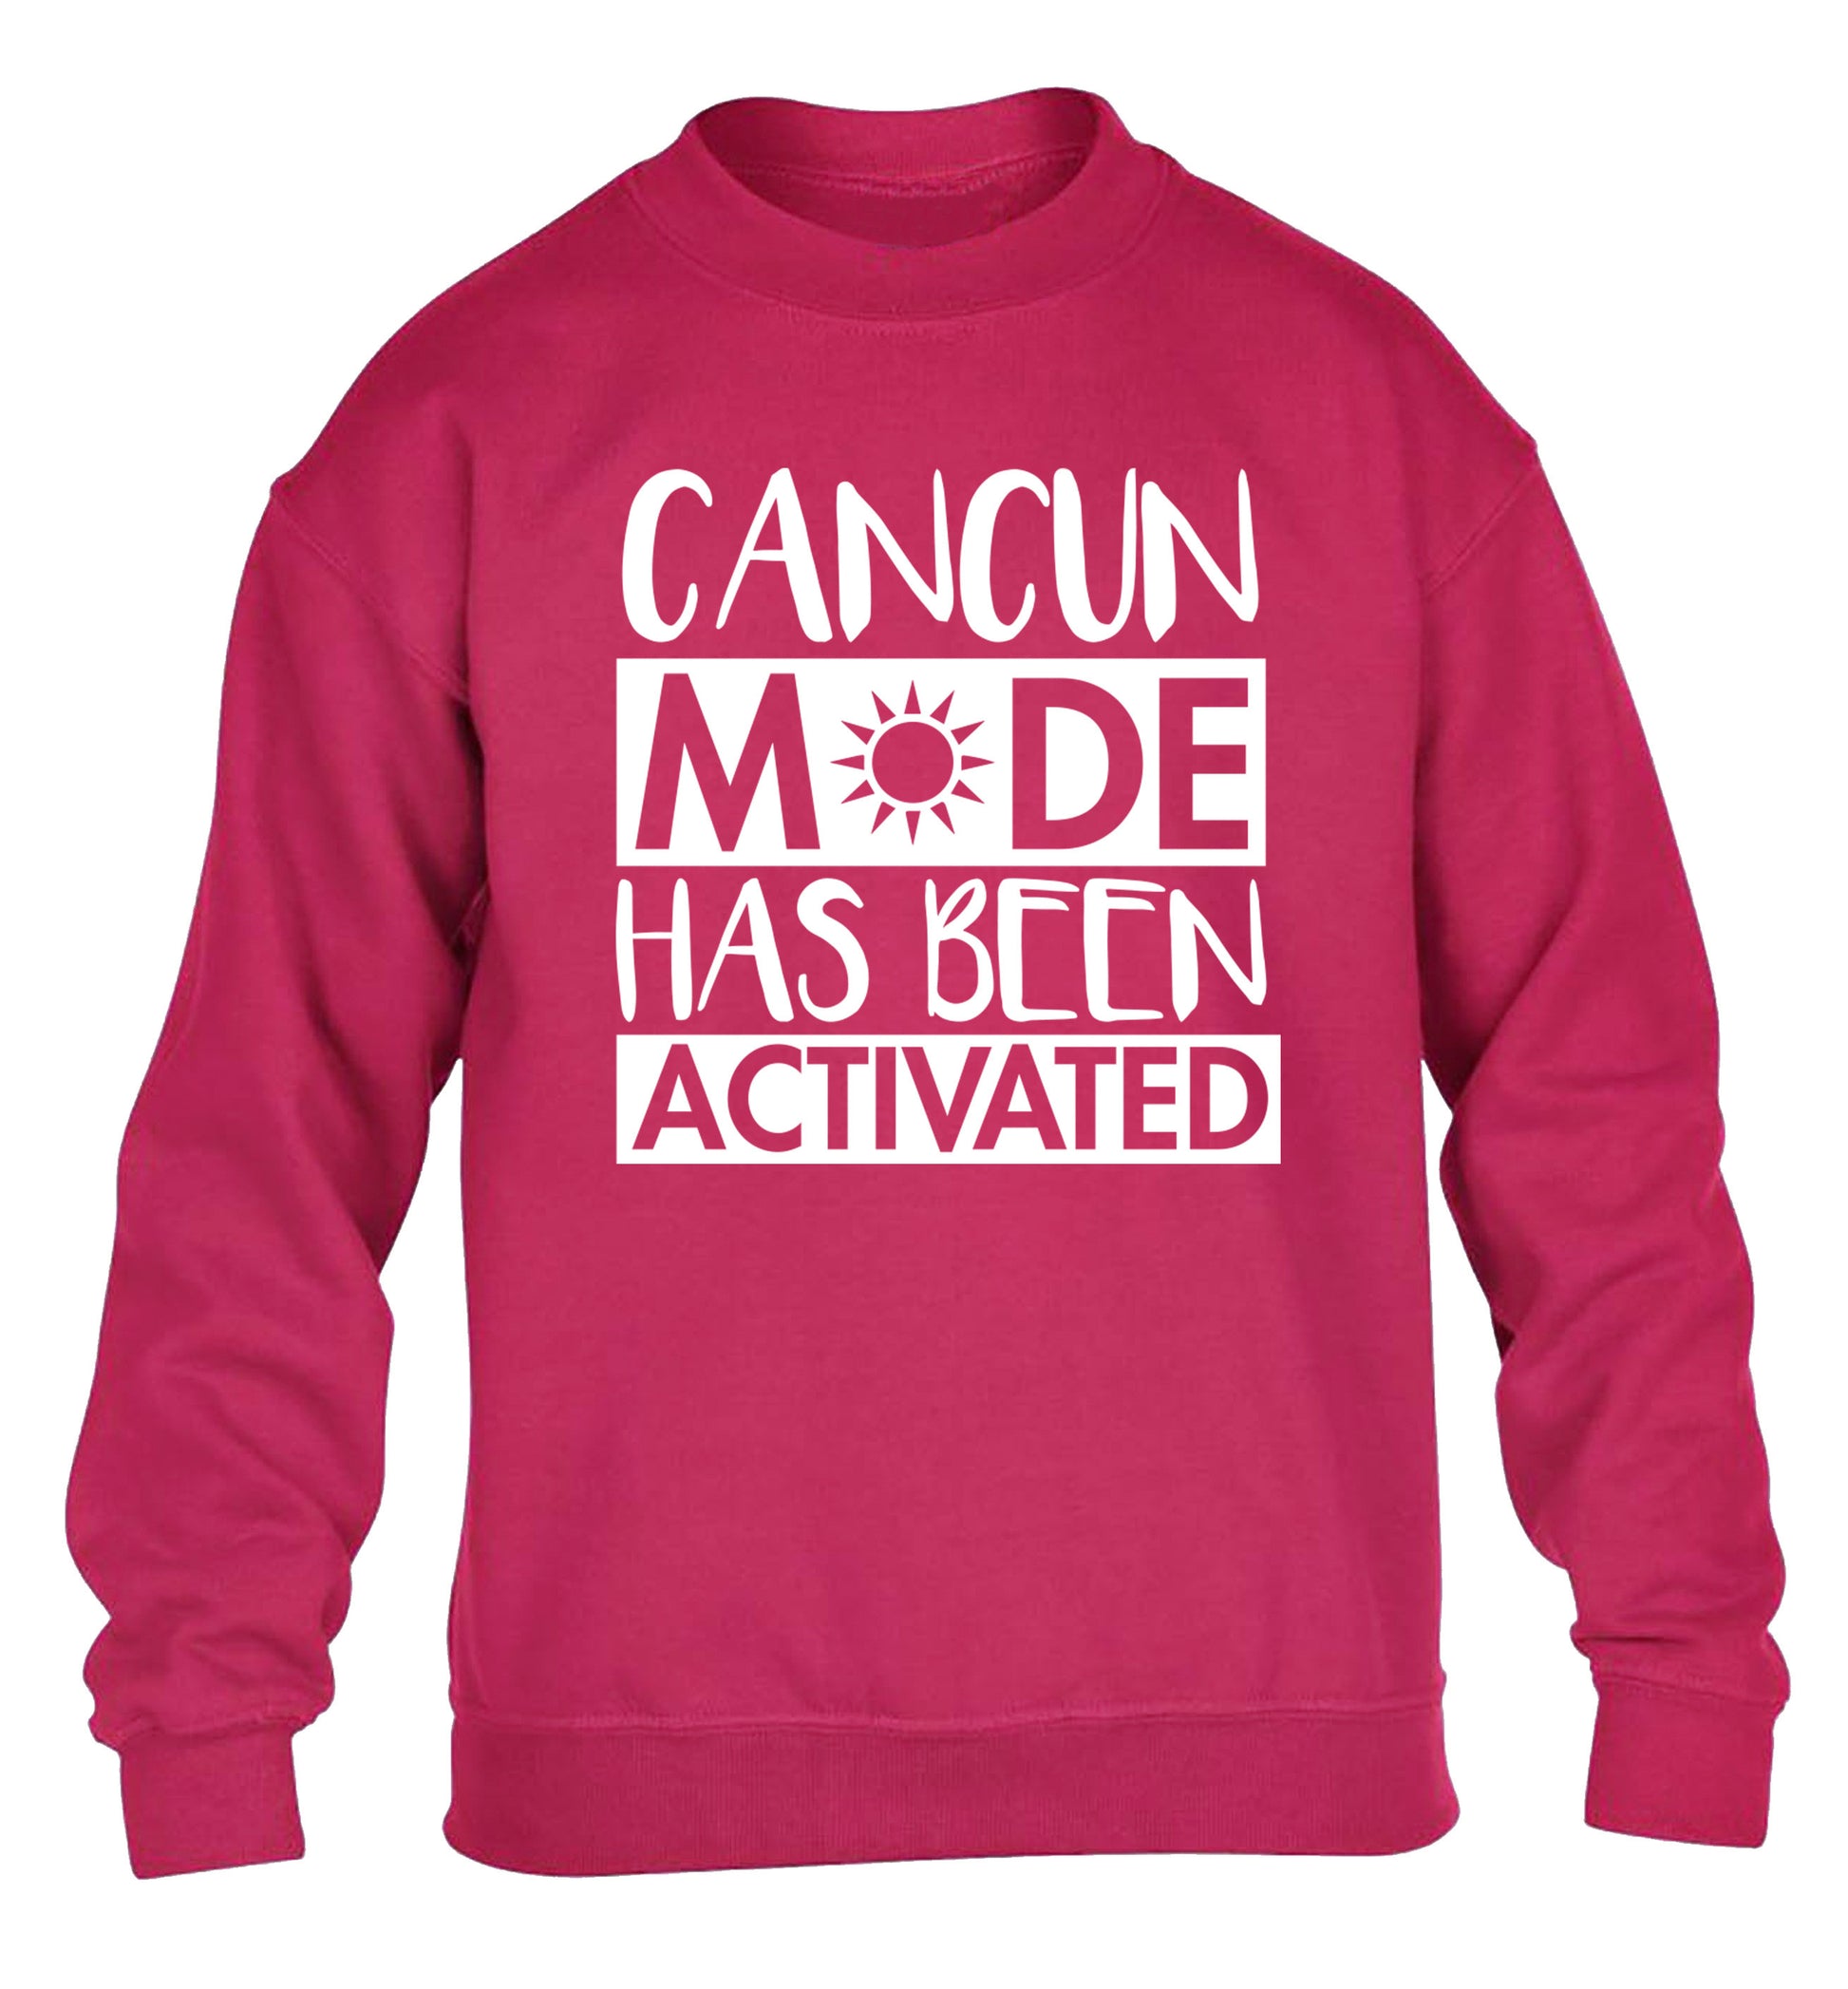 Cancun mode has been activated children's pink sweater 12-14 Years